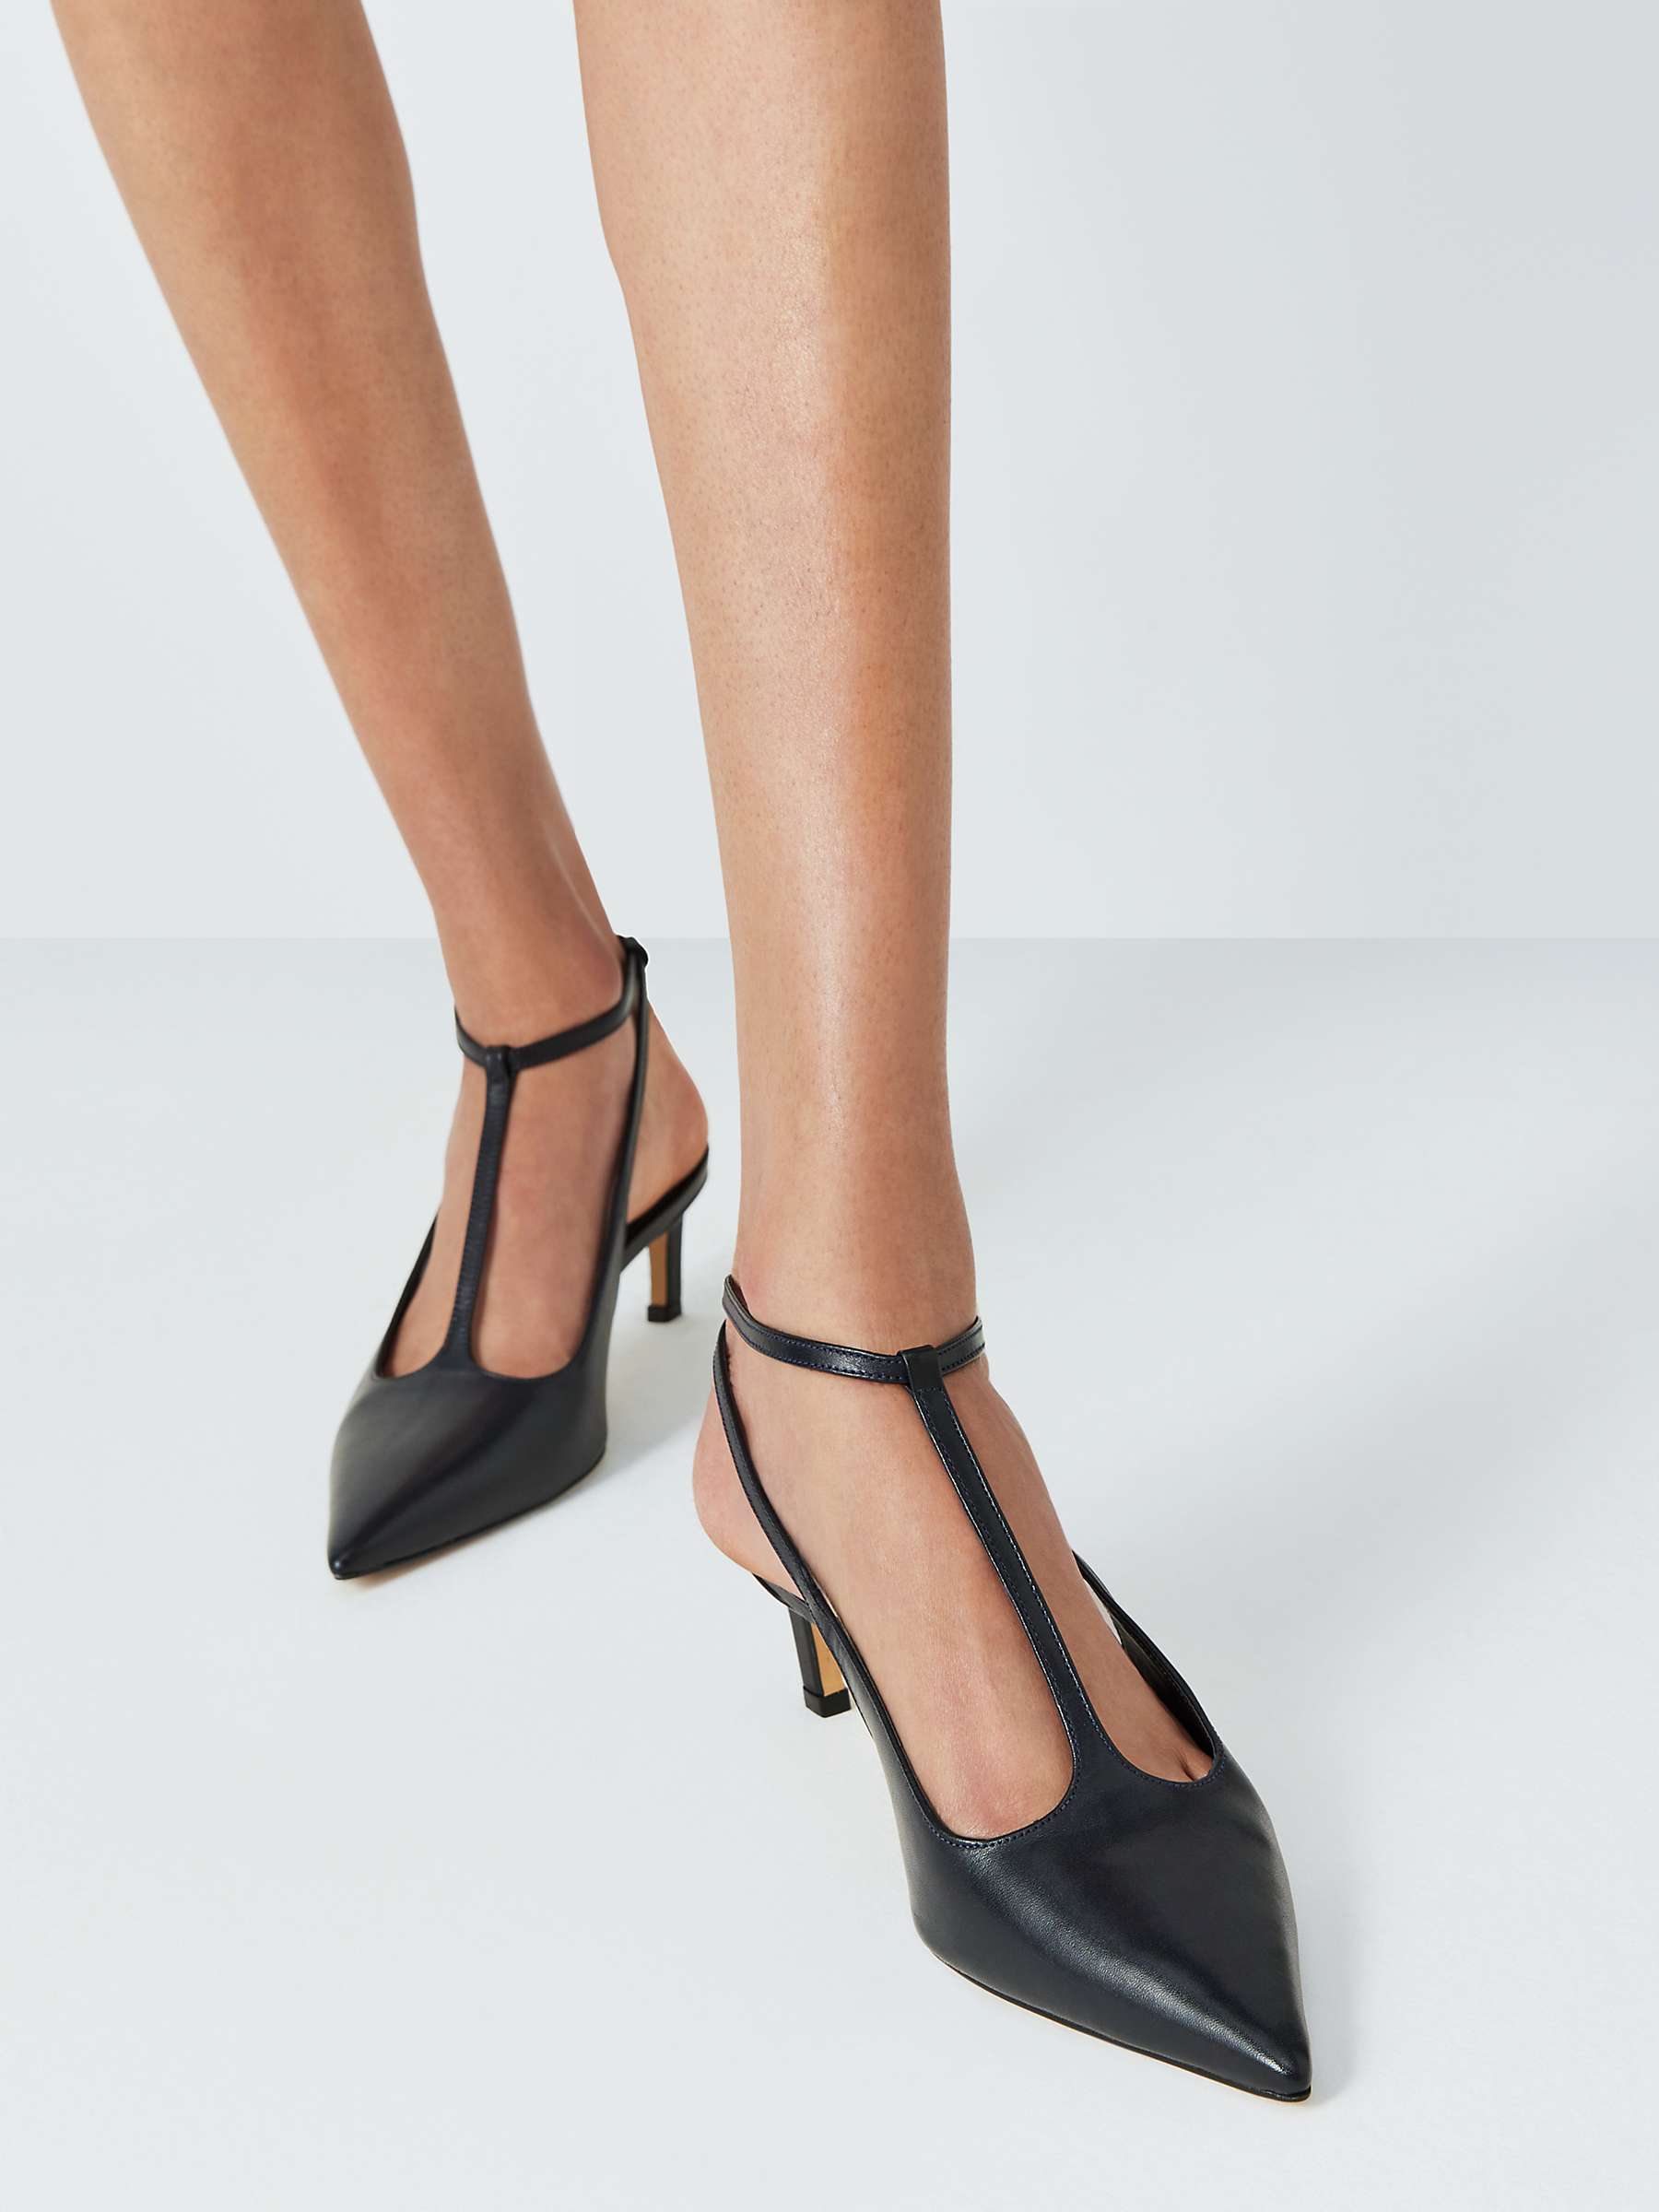 Buy John Lewis Brynn Leather T-Bar Mid Heel Open Court Shoes Online at johnlewis.com